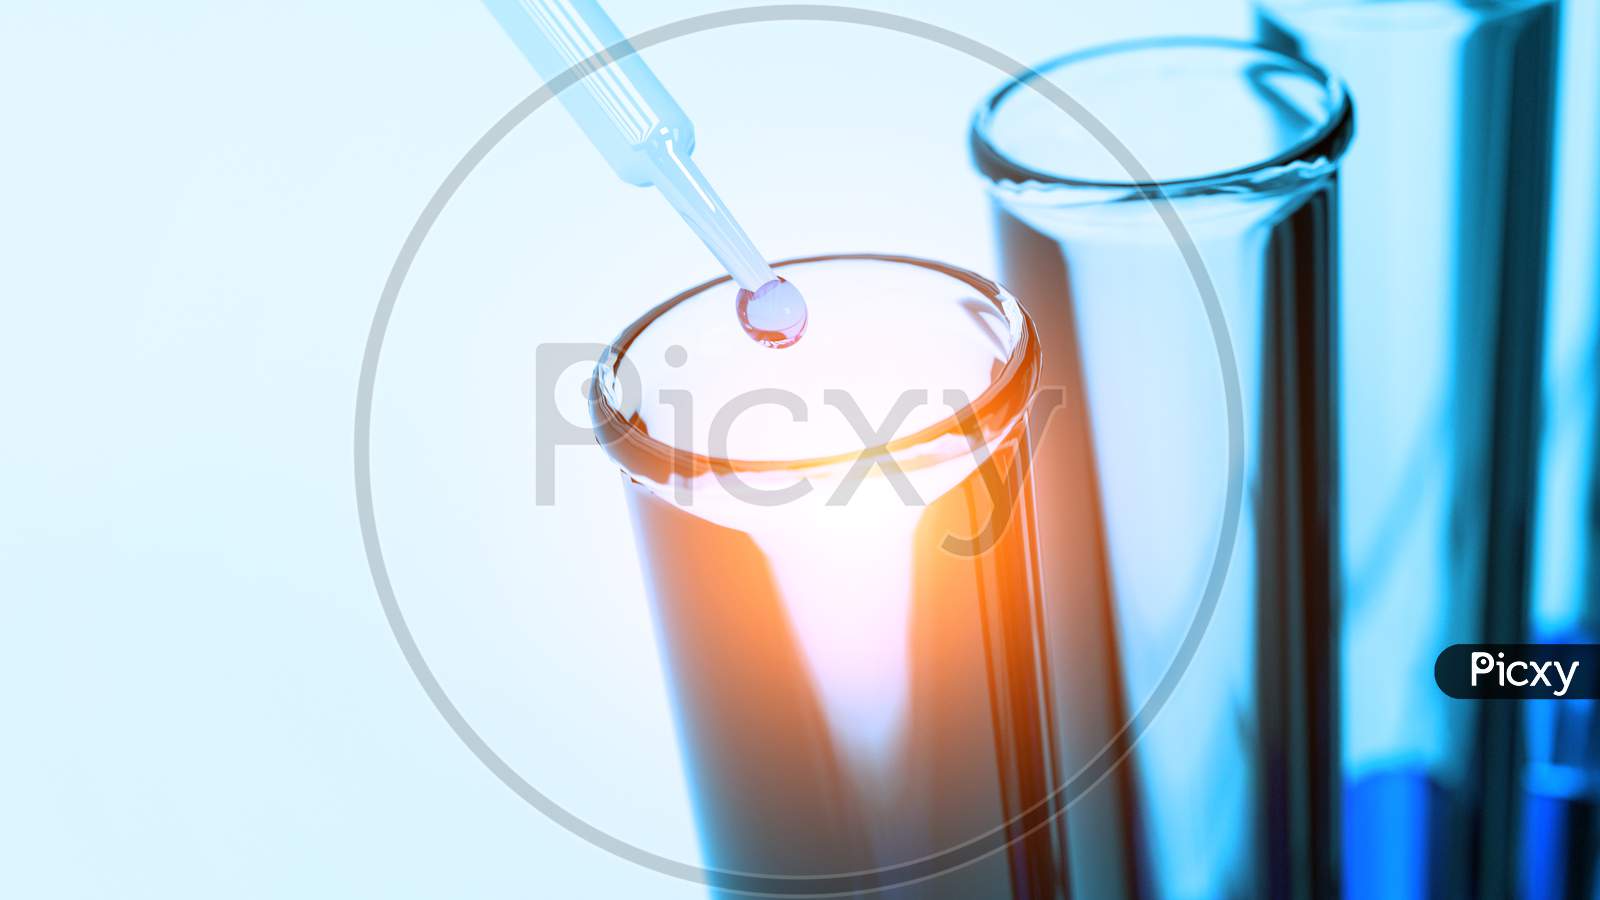 Close Up Pipette Dropping Blue Solution Sample Into Test Tube In Laboratory. Science Researching And Nanotechnology Biology Concept. Selective Focus On Liquid Water Drop. 3D Illustration Rendering